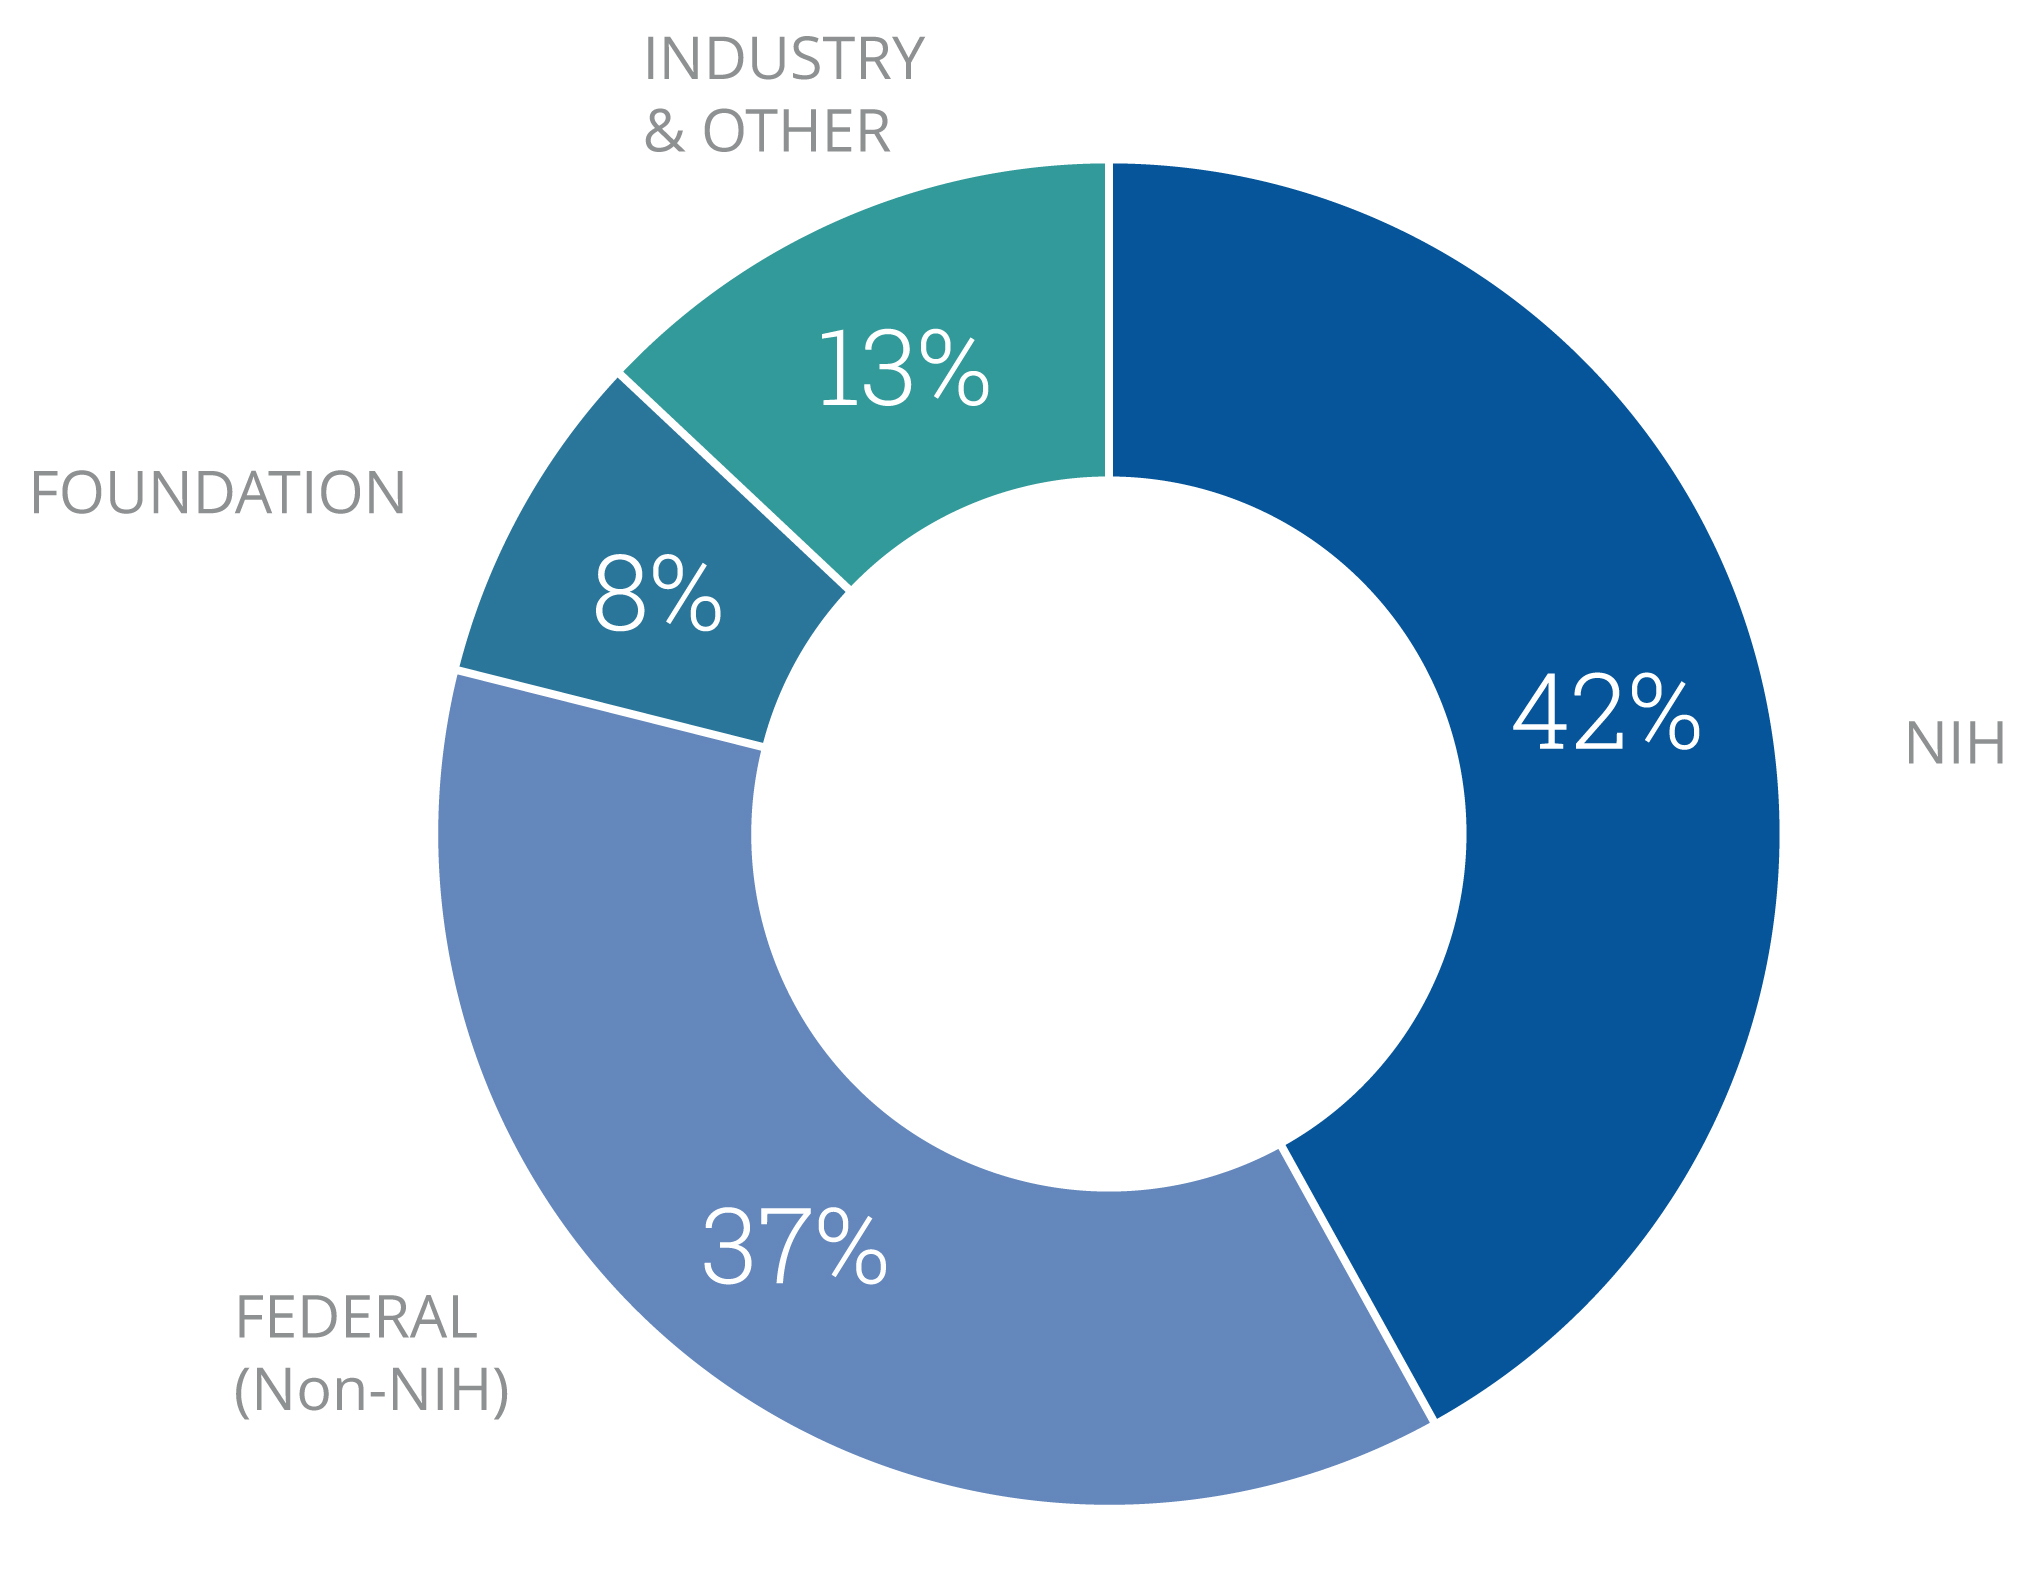 Graphic illustration of a pie chart showing the distribution of sources of funding for Section research.